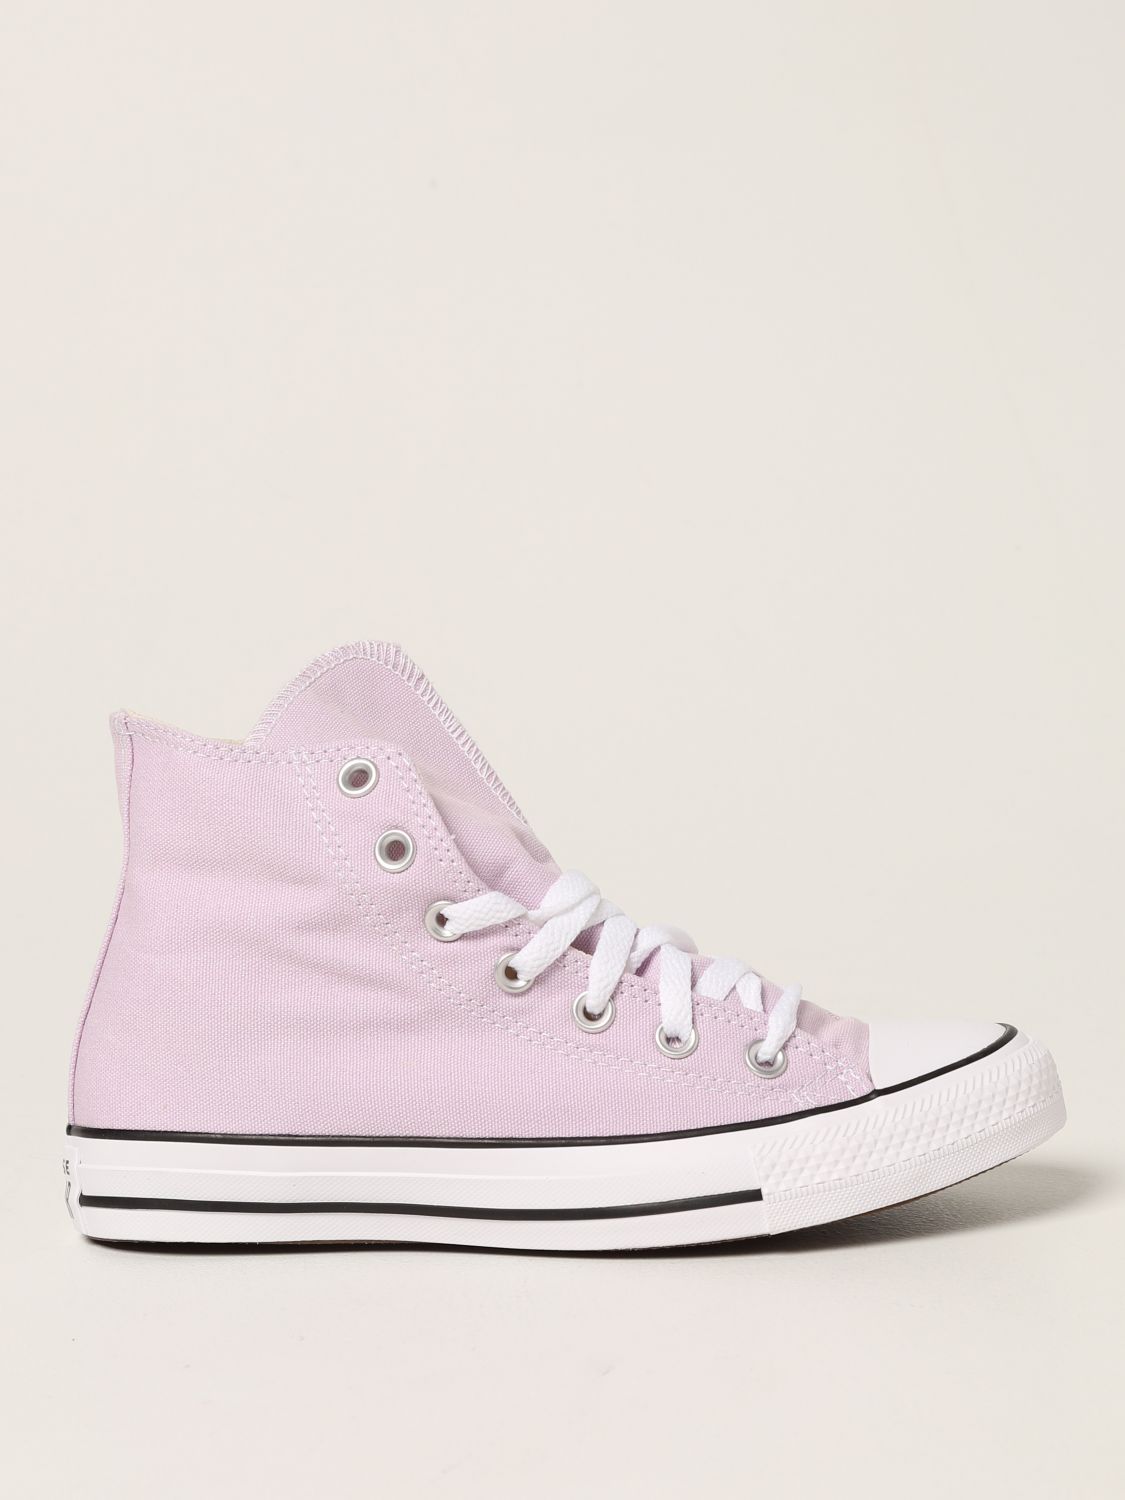 Converse Chuck Taylor All Star Converse canvas trainers